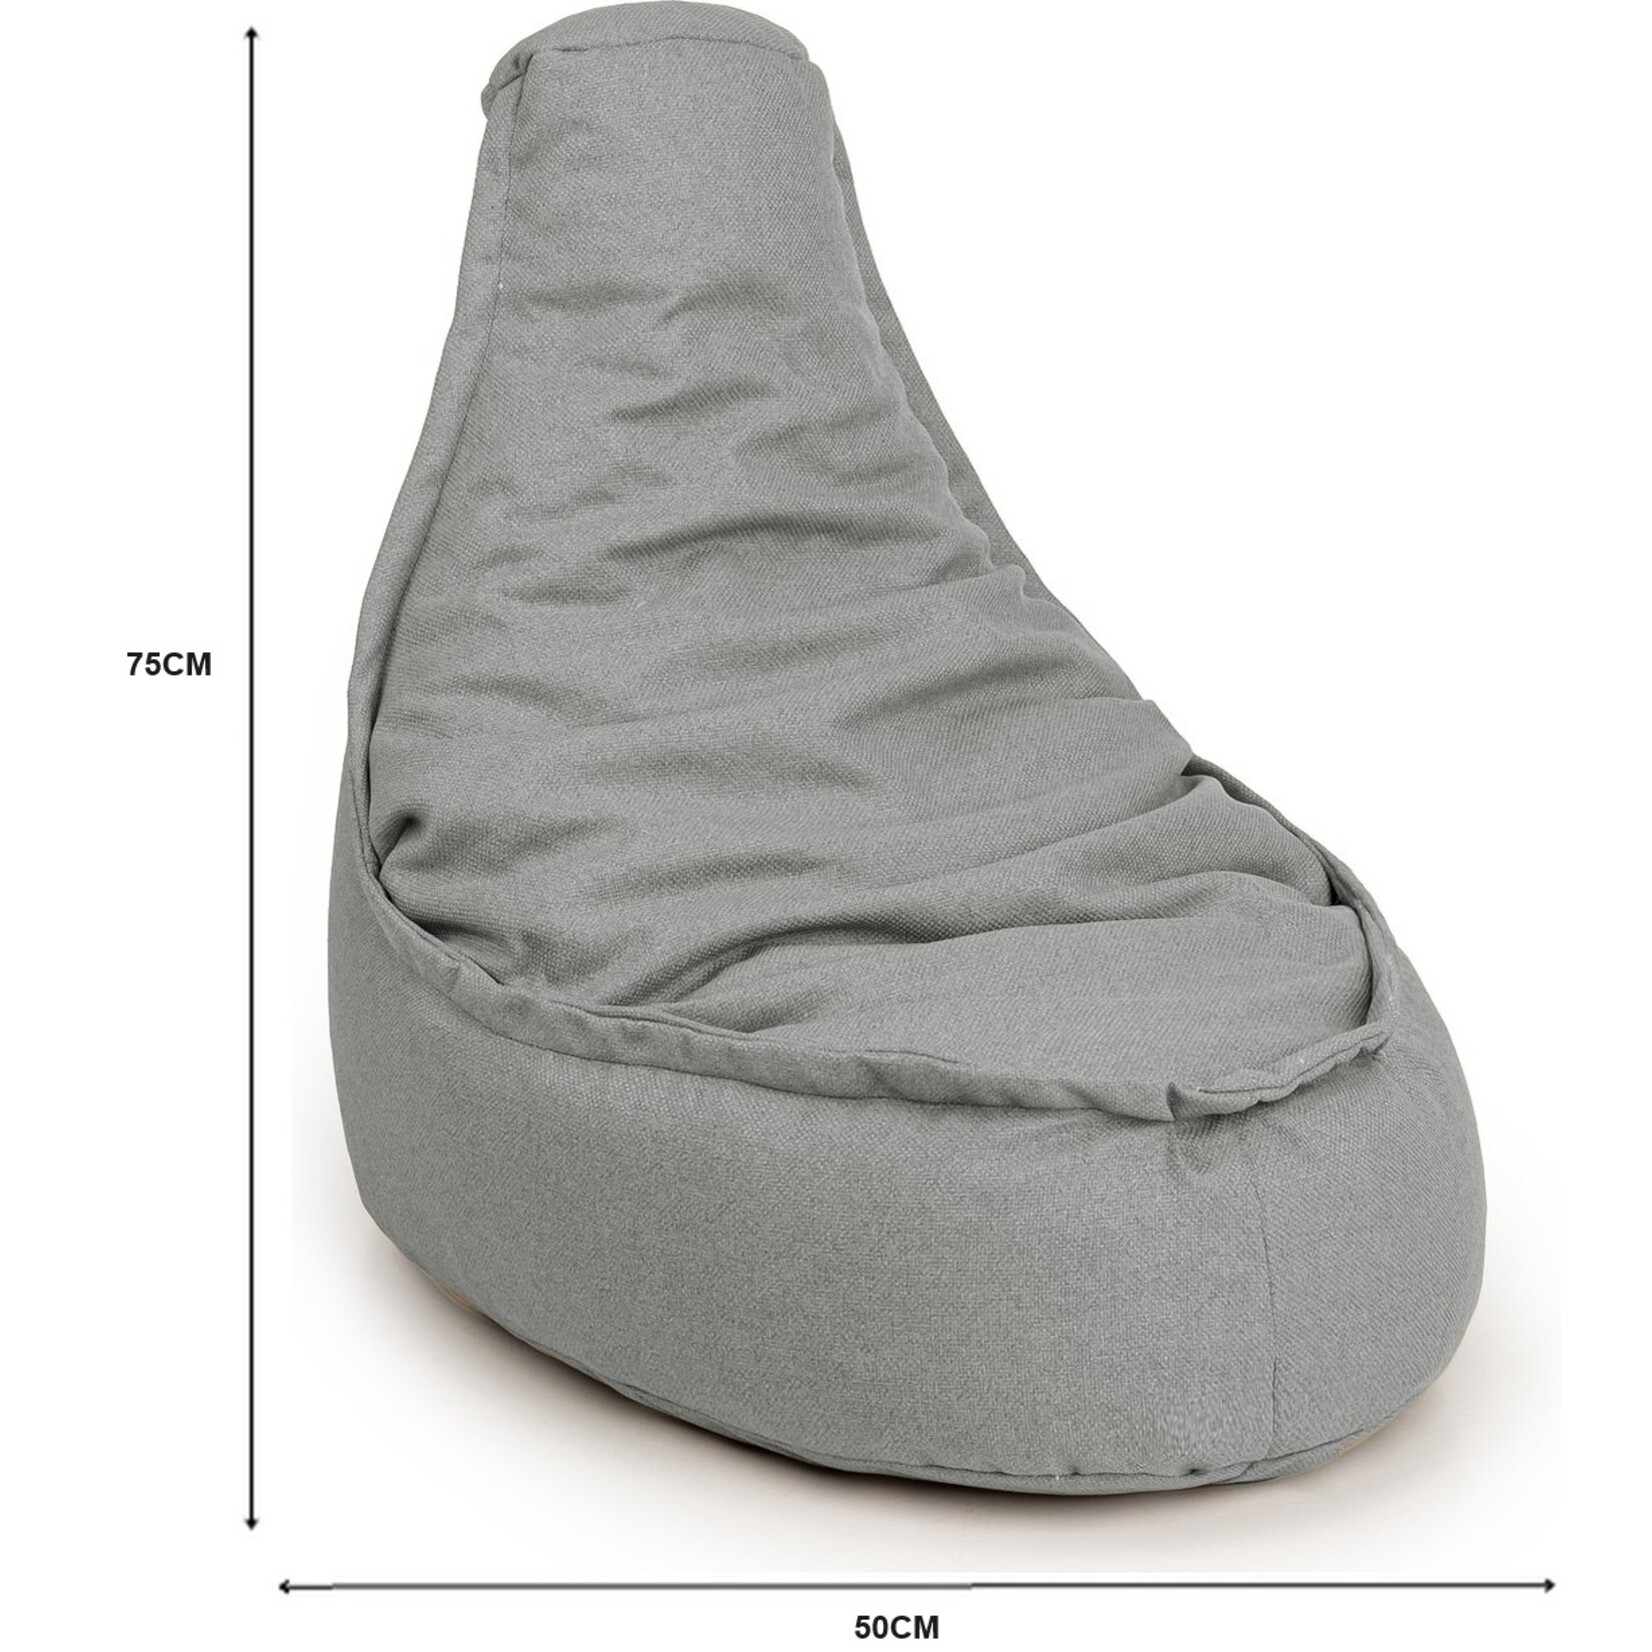 Bobbel Home Bobbel Home - Beanbag Chair Shape - Milano - Durable - Lounge Chair - 98% Recycled Pet Bottles - 100 Liters - For Indoor and Outdoor - Junior - Water Repellent - Gray